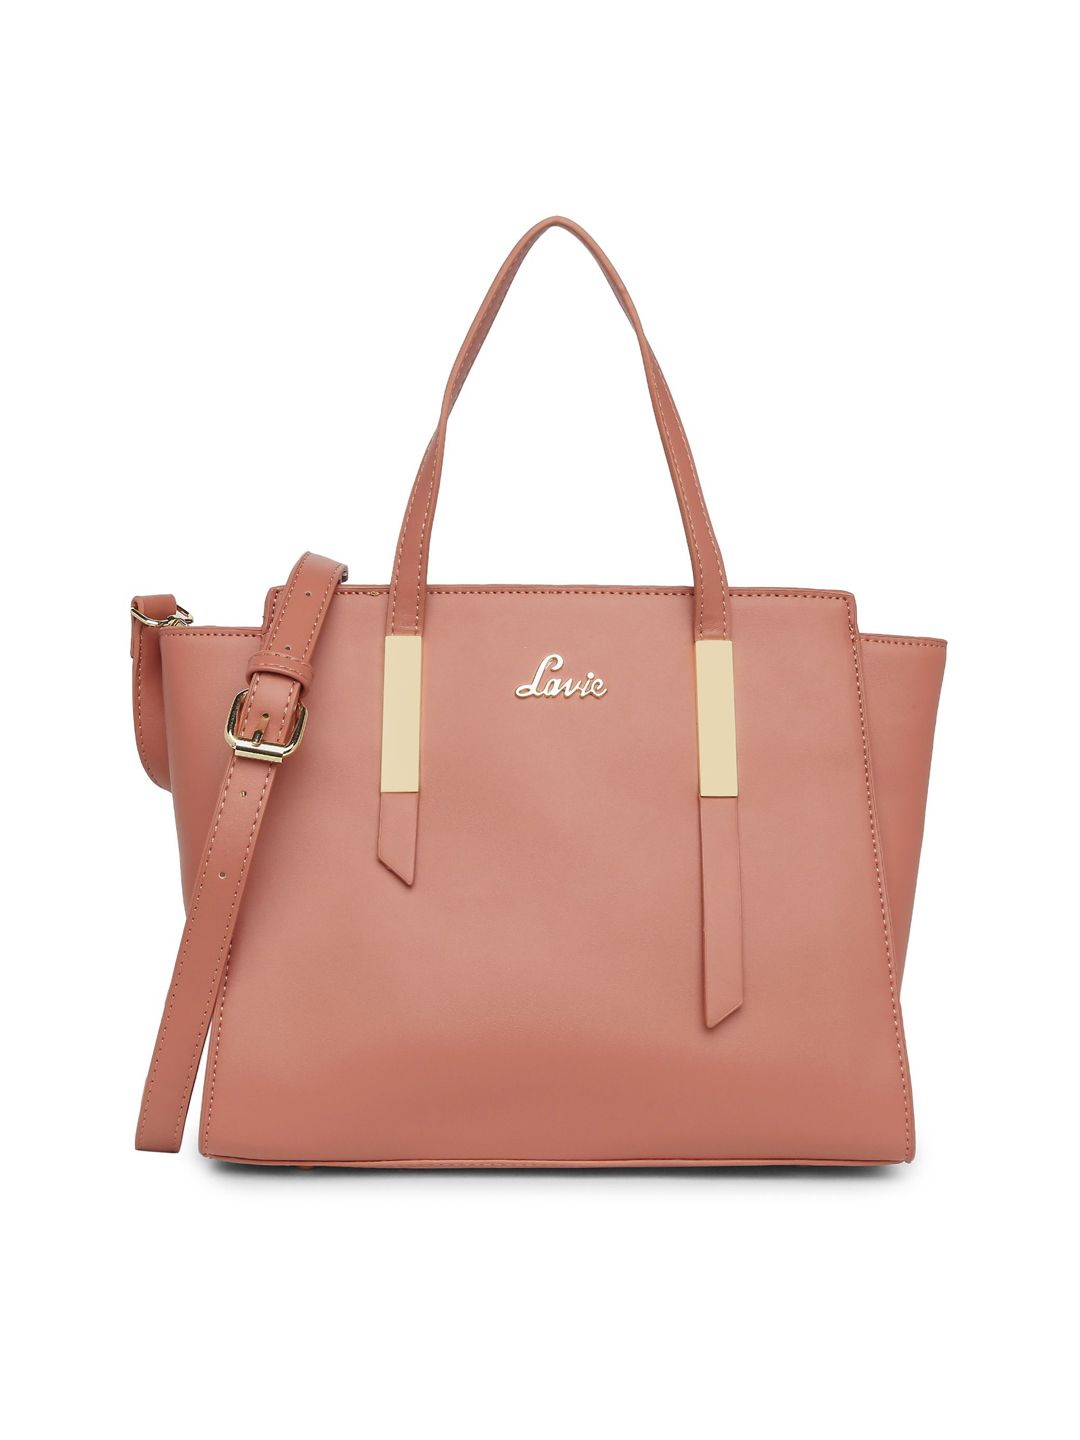 Lavie Pink PU Swagger Handheld Bag Price in India